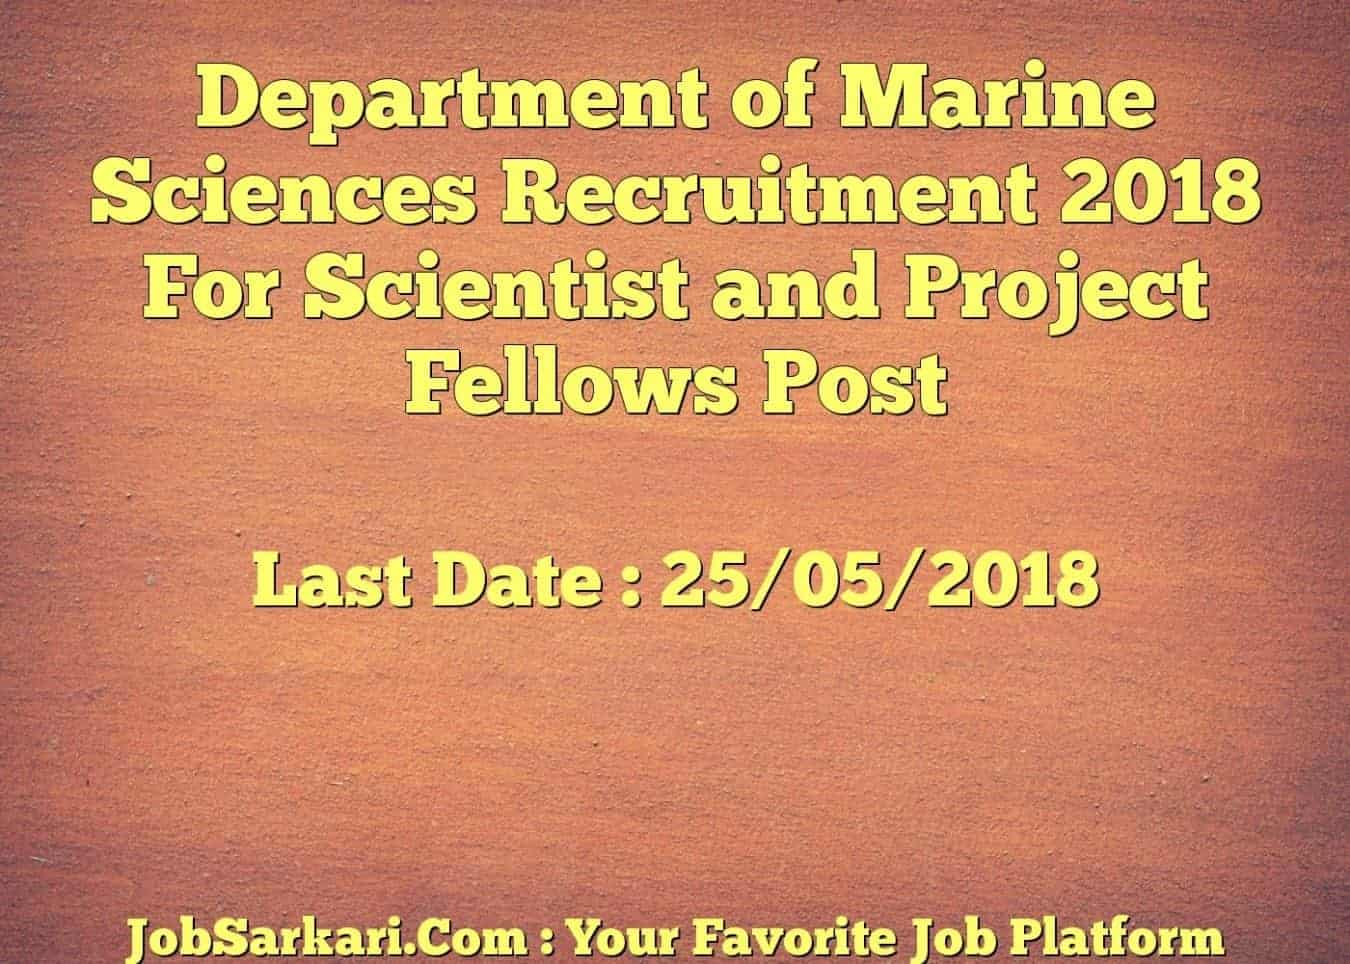 Department of Marine Sciences Recruitment 2018 For Scientist and Project Fellows Post